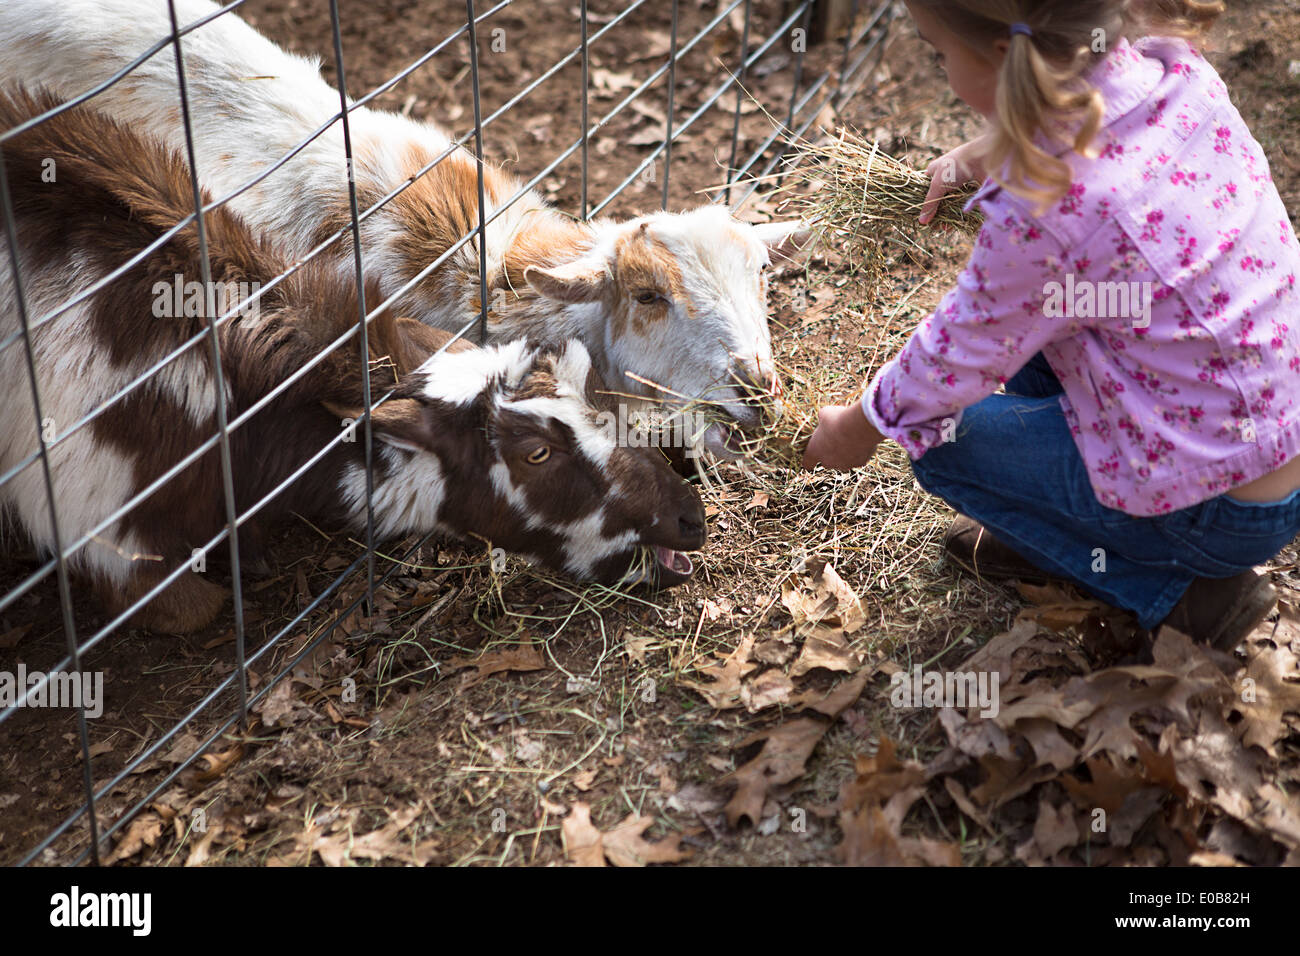 Young girl feeding goats underneath fence Stock Photo